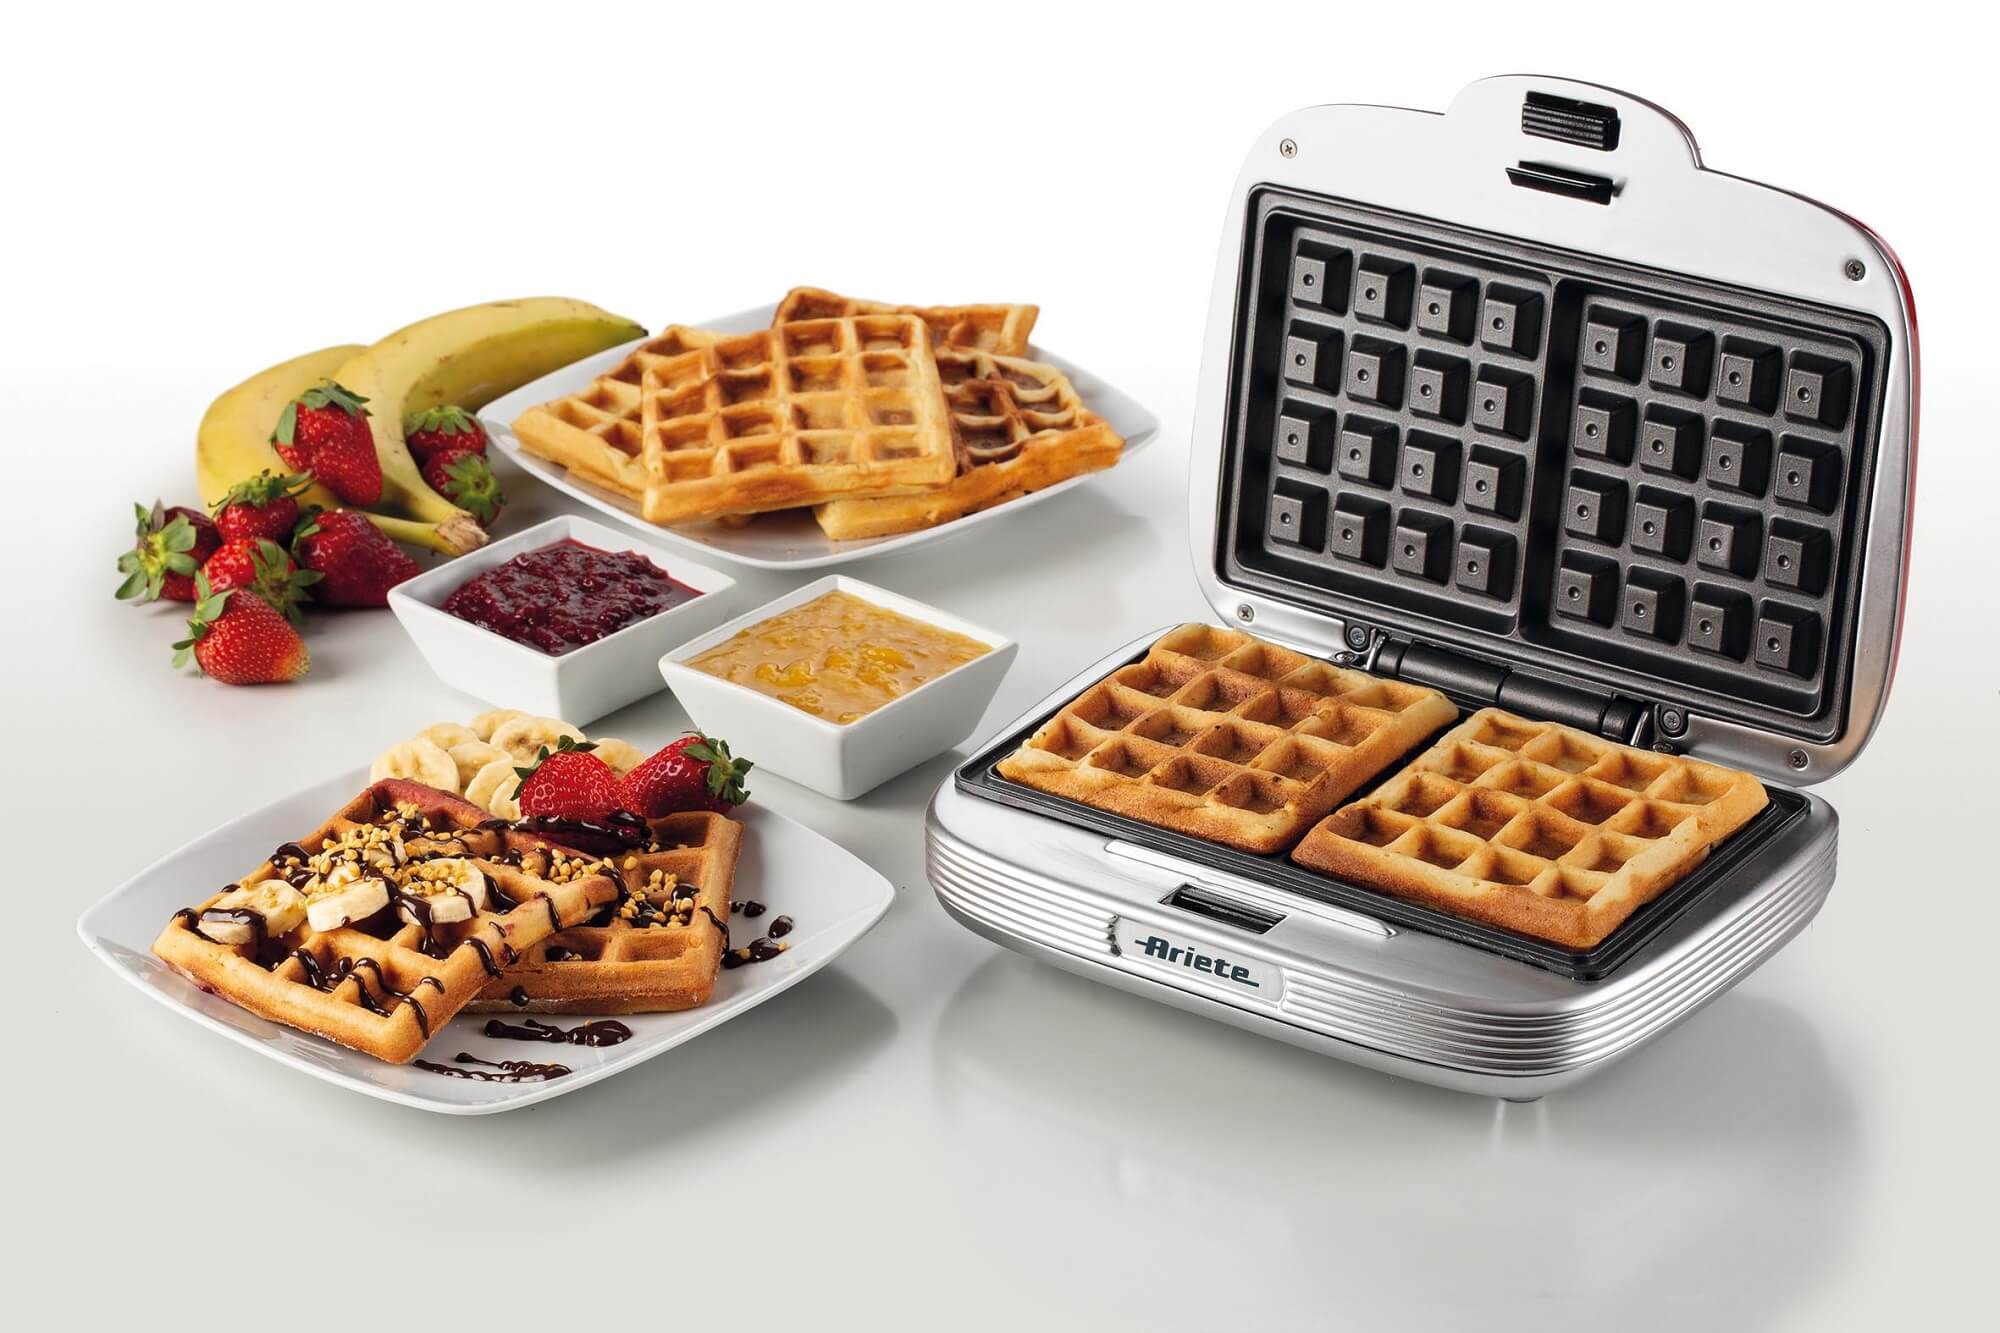 Waffle Maker Blue Party Time 00C197301AR0 ARIETE